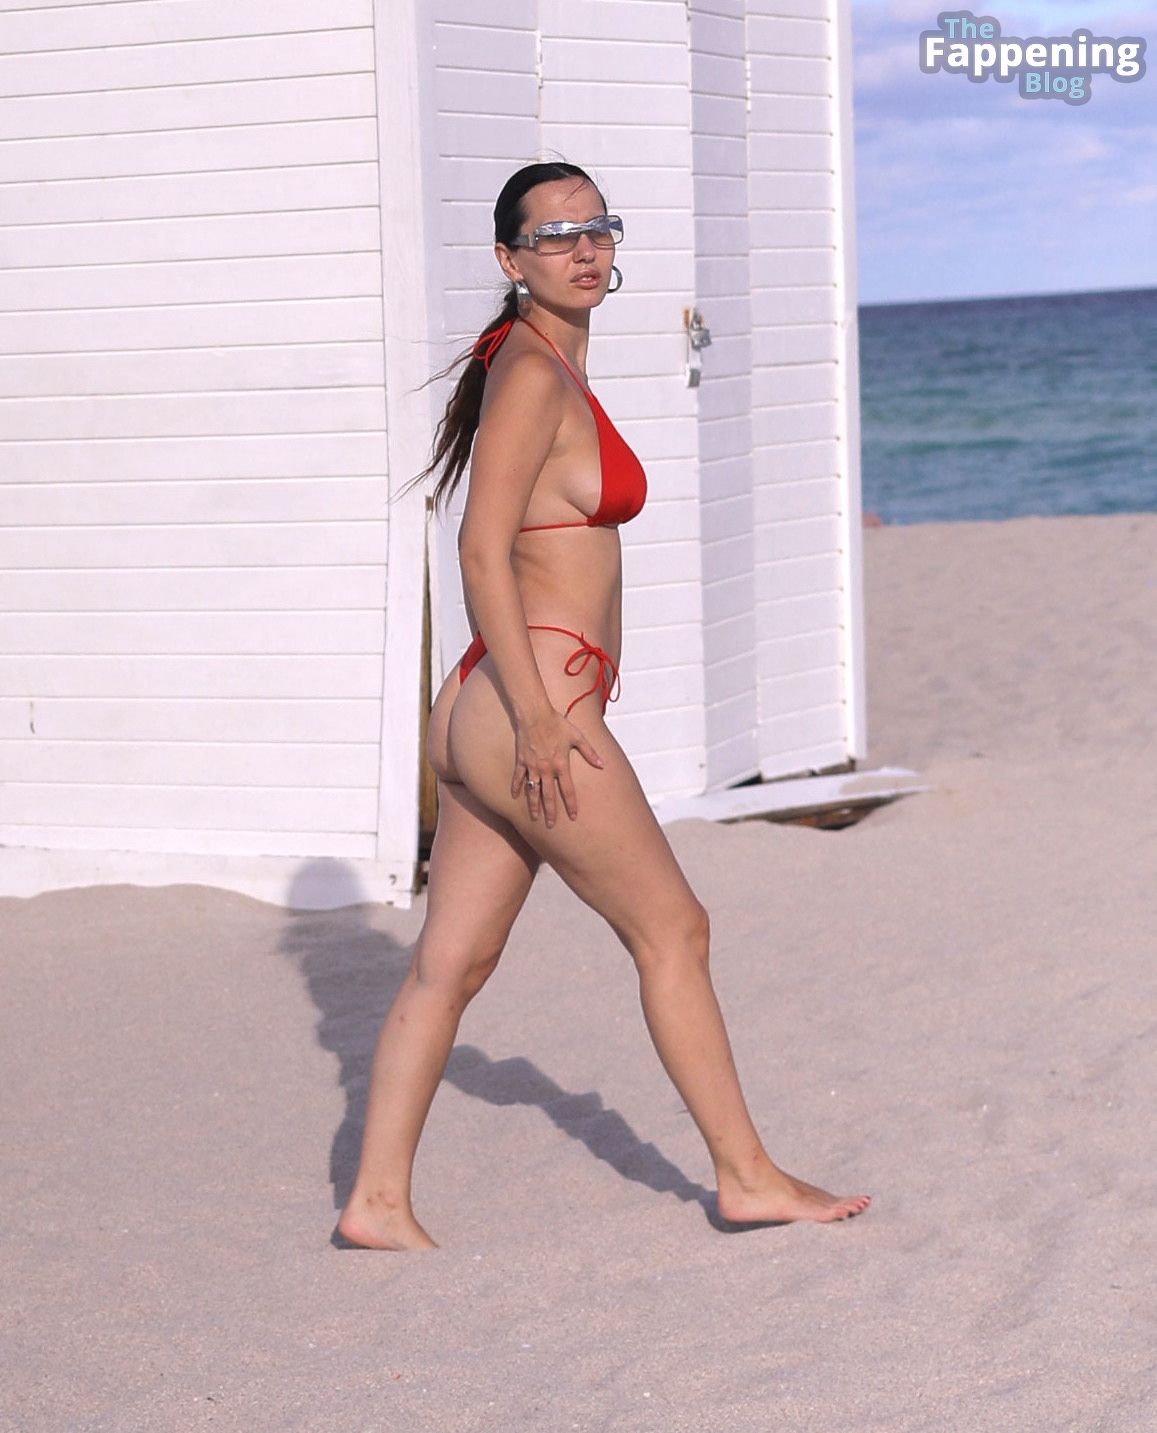 Iva Kovacevic Shows Off Her Red Bikini in the Hot Sun During Yacht Week in Miami (58 Photos)